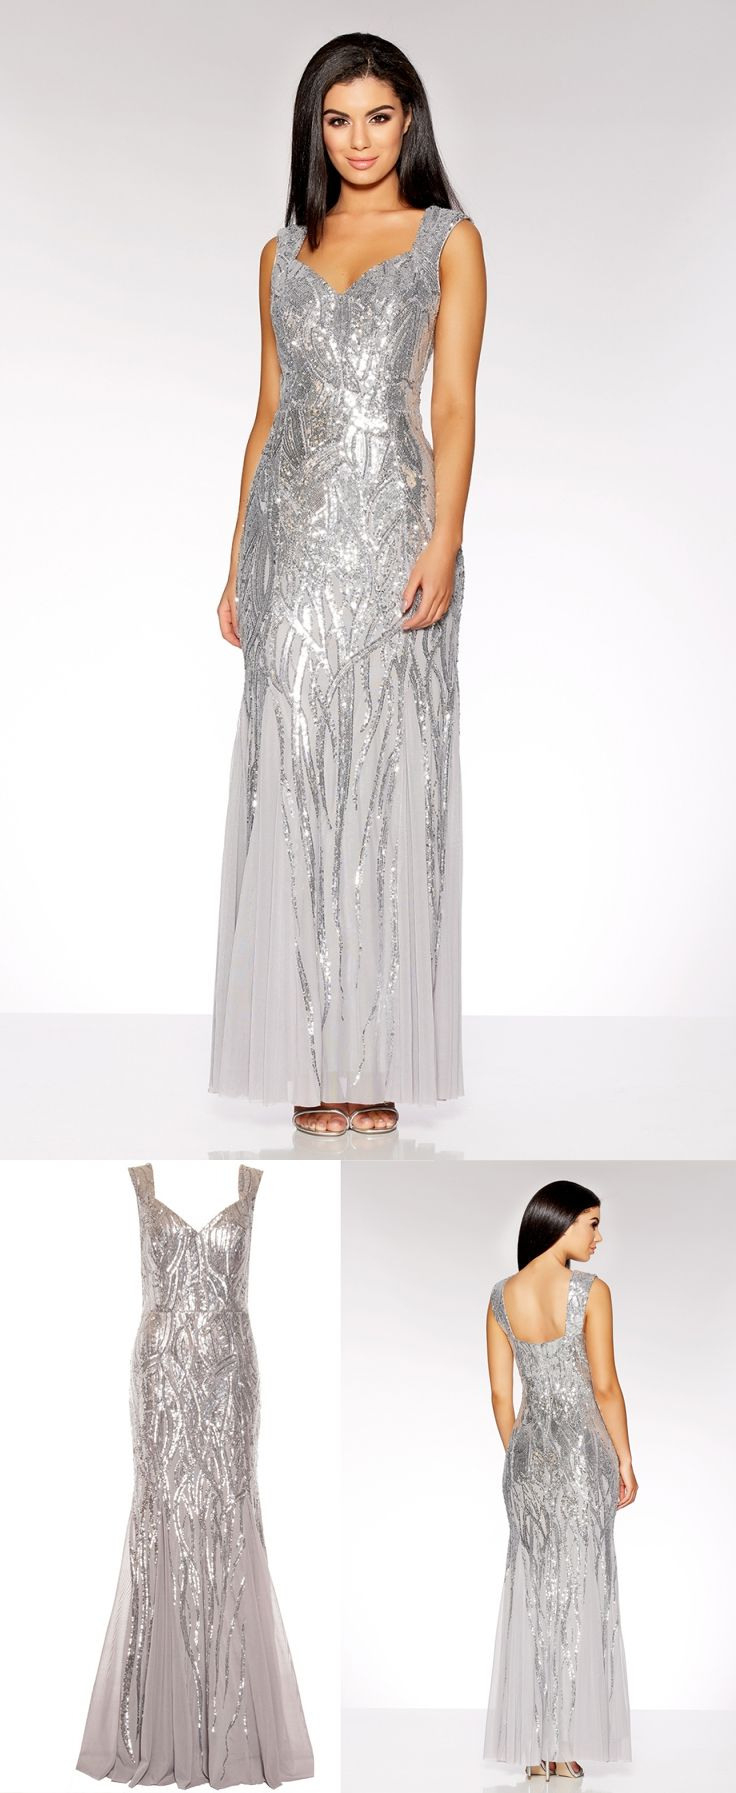 Silver Sequin Sweetheart Fishtail Maxi Dress. From Quiz